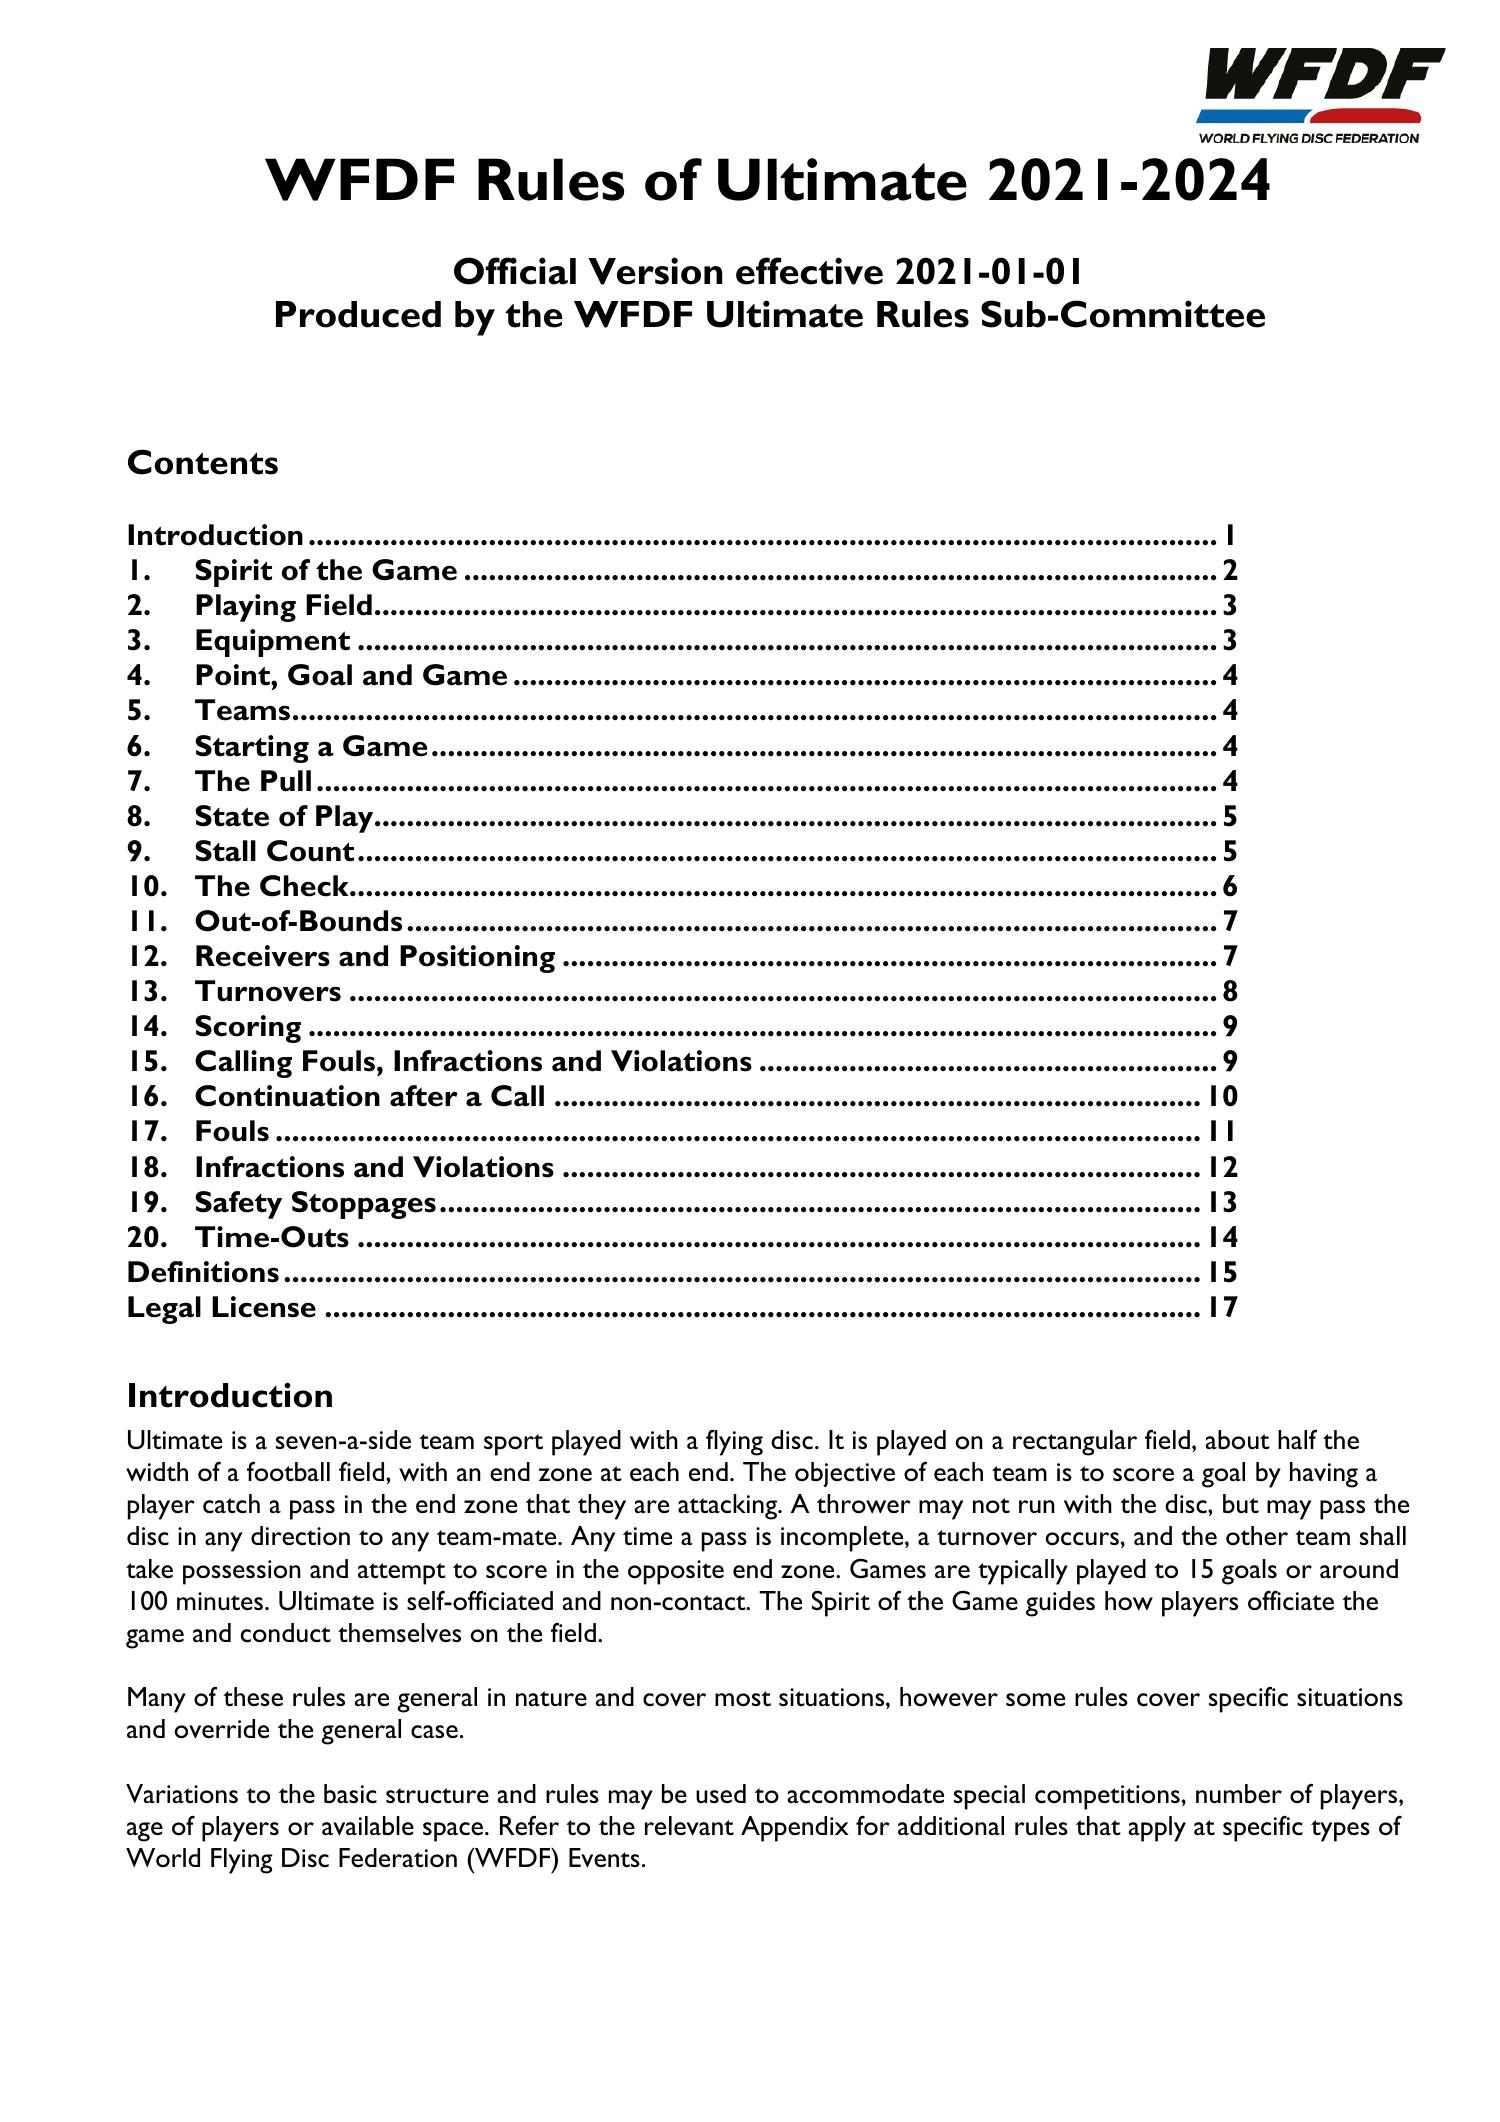 WFDF Rules of Ultimate 20212024.pdf DocDroid